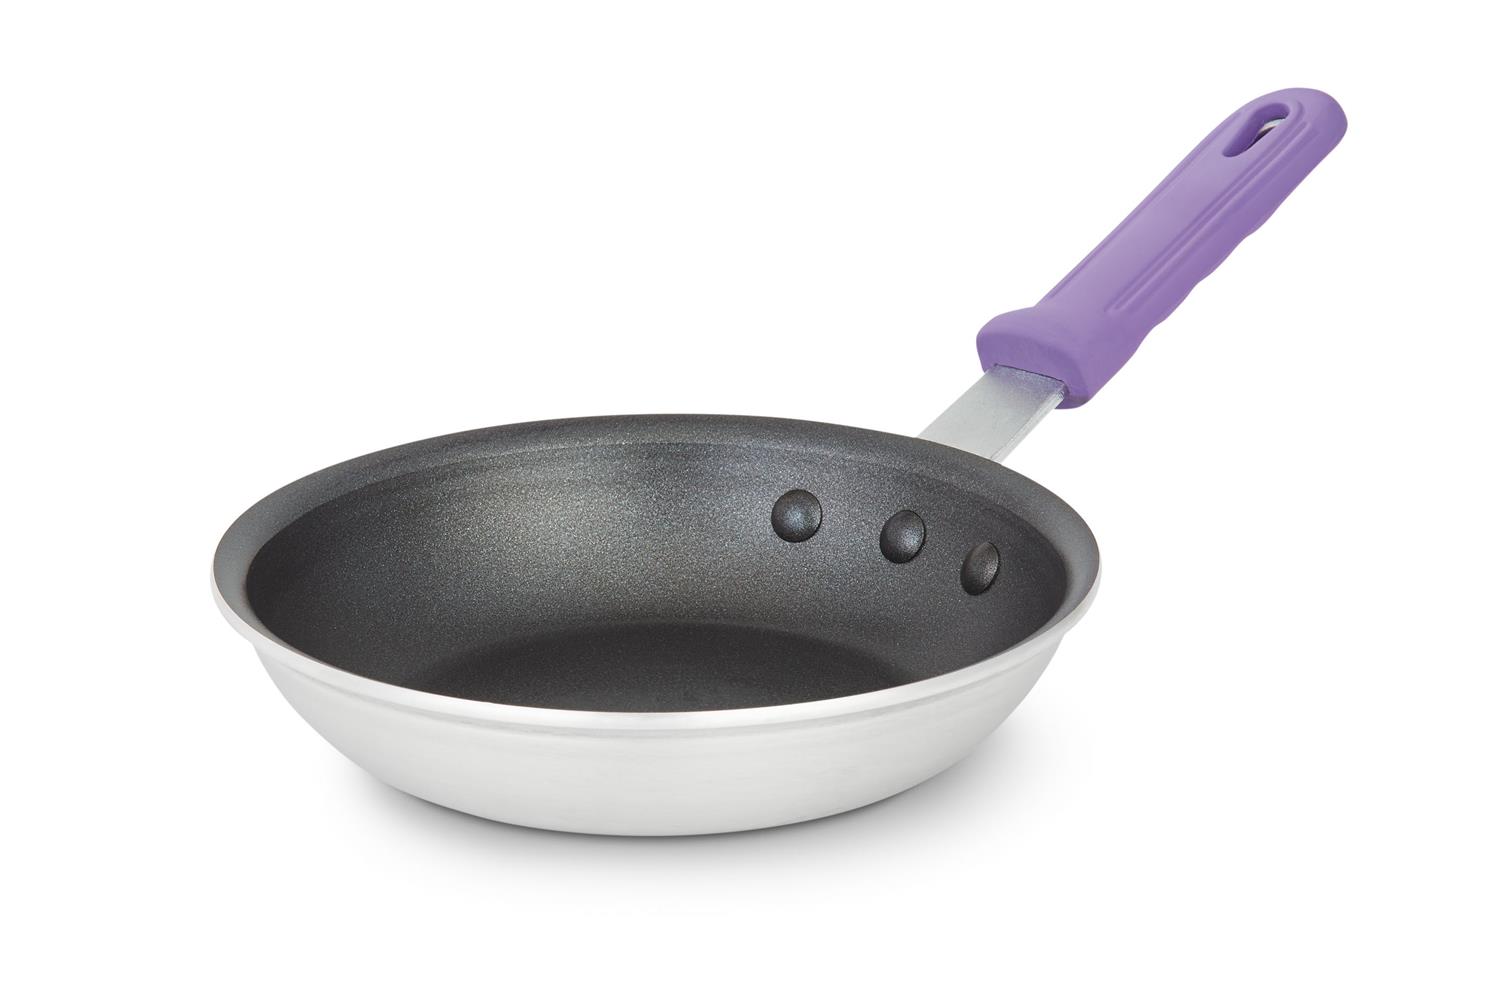 Vollrath T400780 Wear-Ever Fry Pans with SteelCoat x3 Interior and Purple Handle